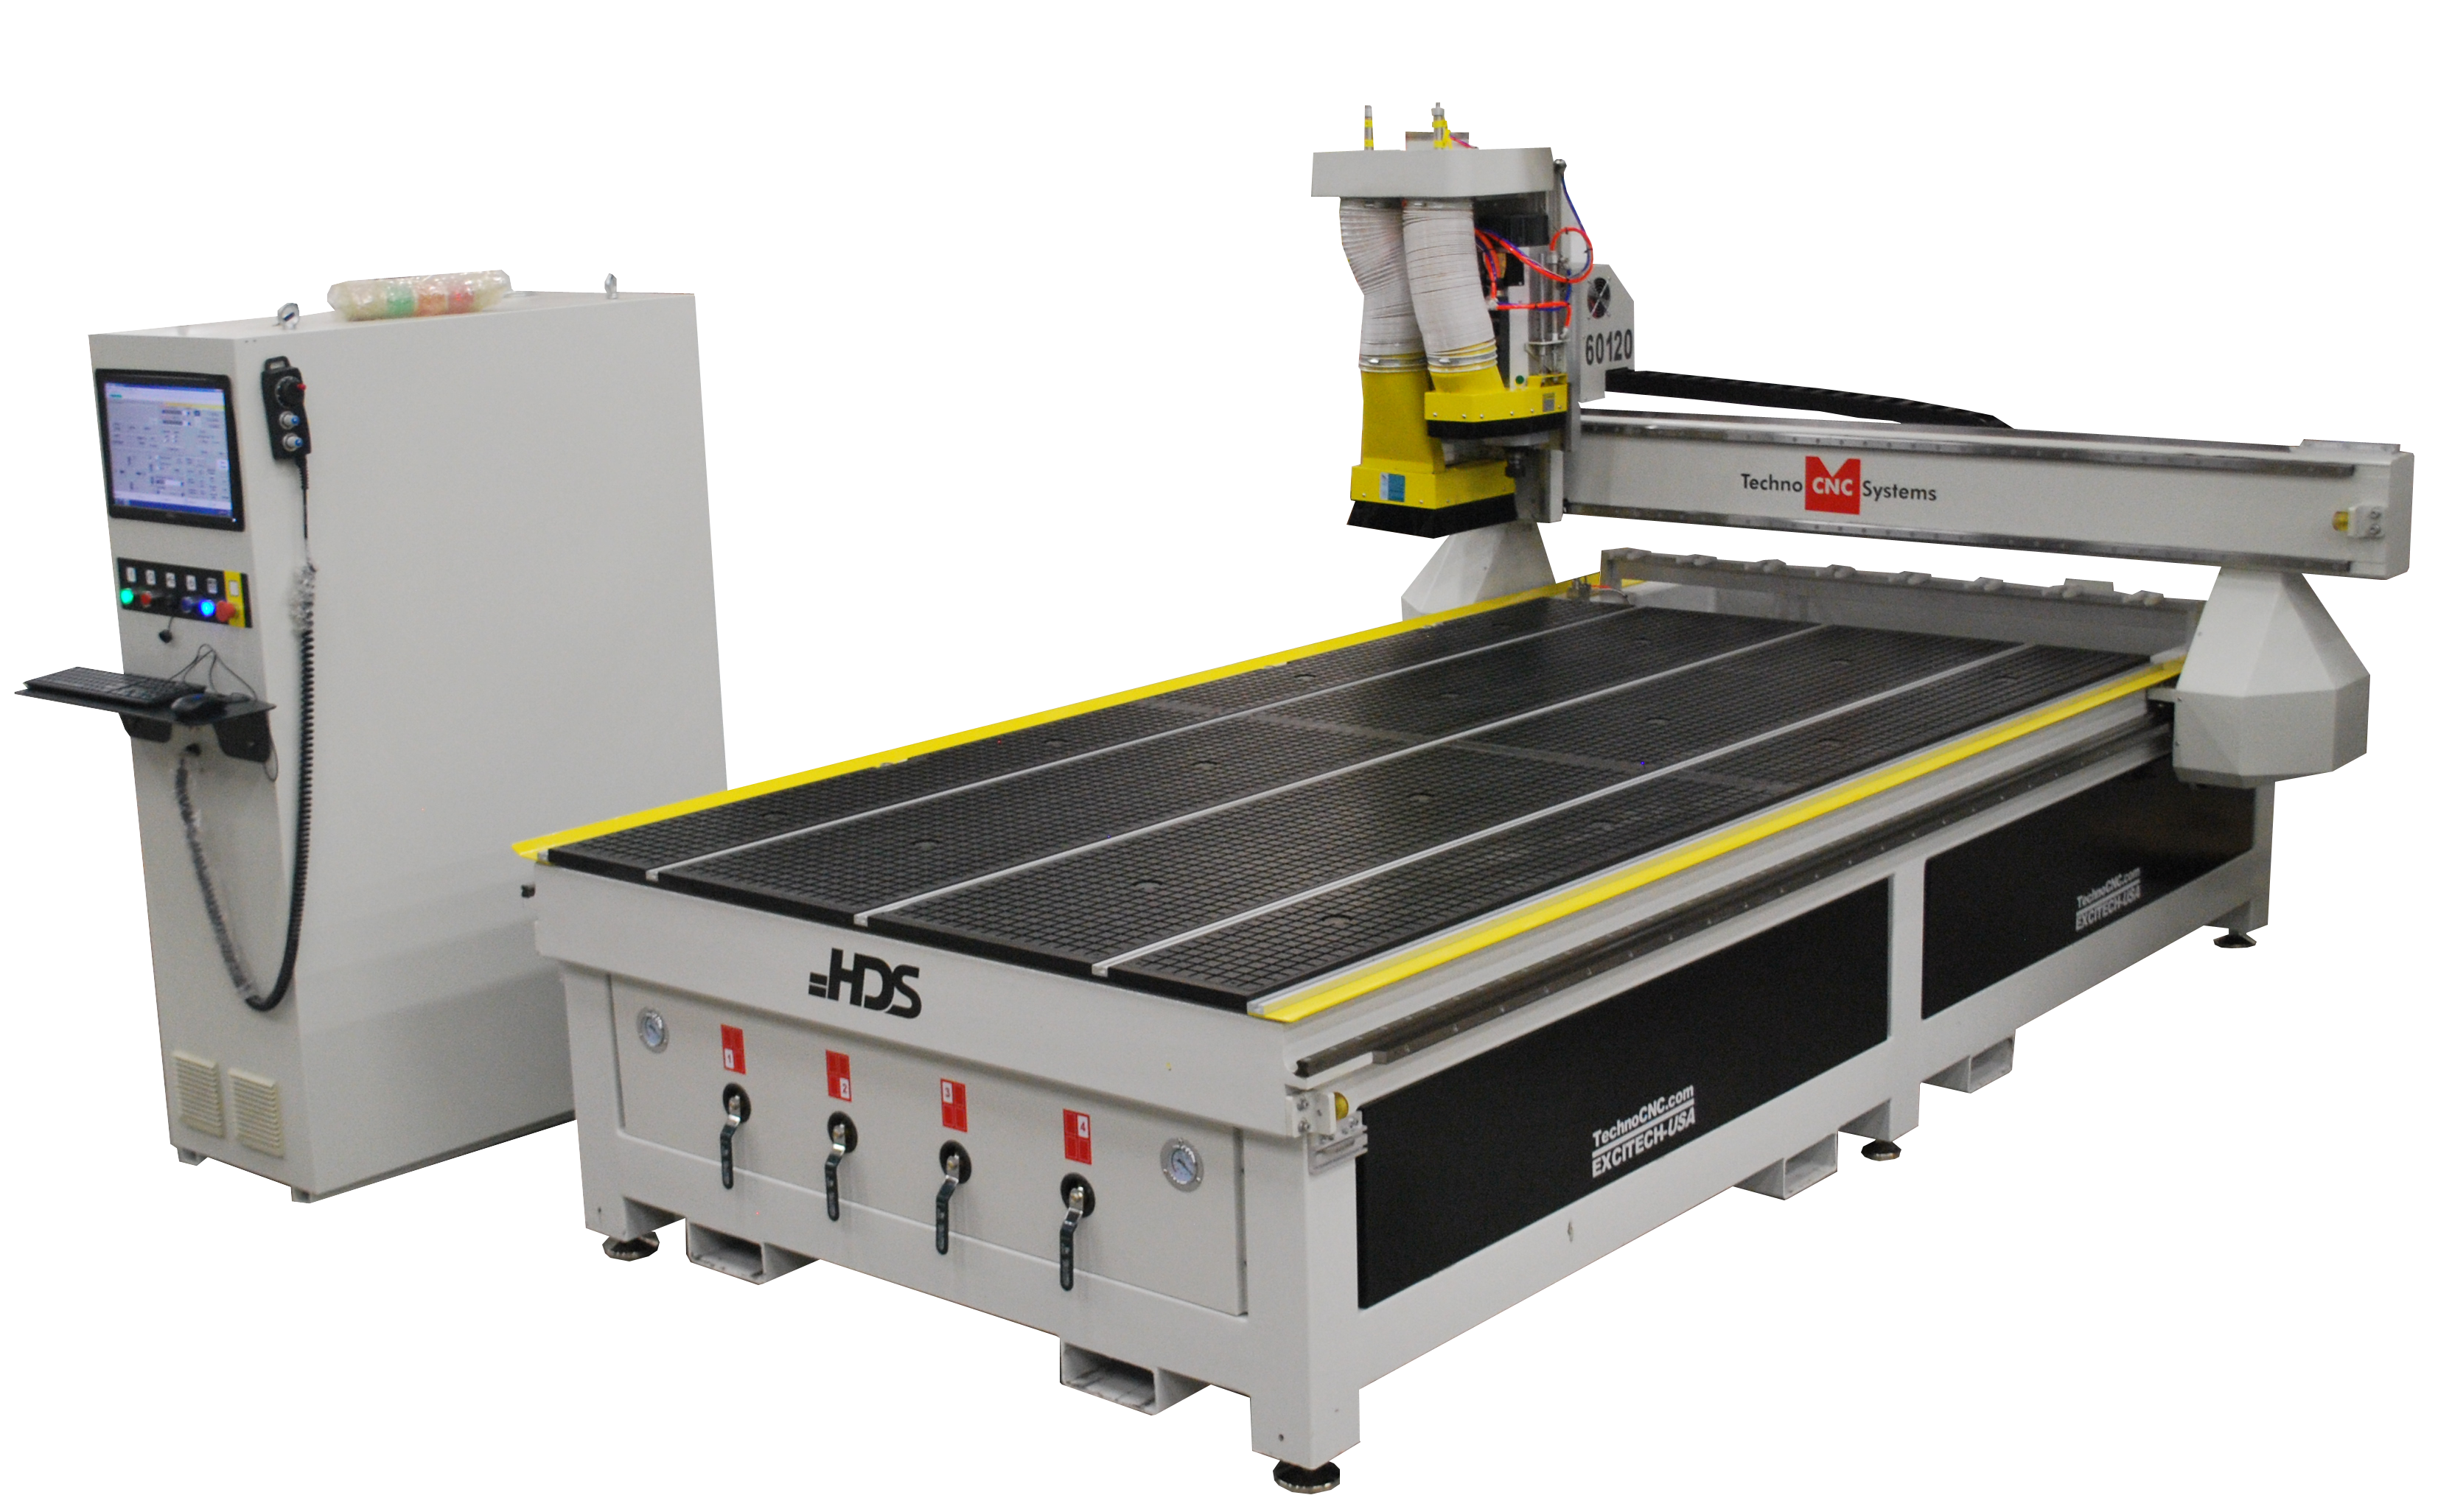 hds series cnc router for wood, plastic, and more